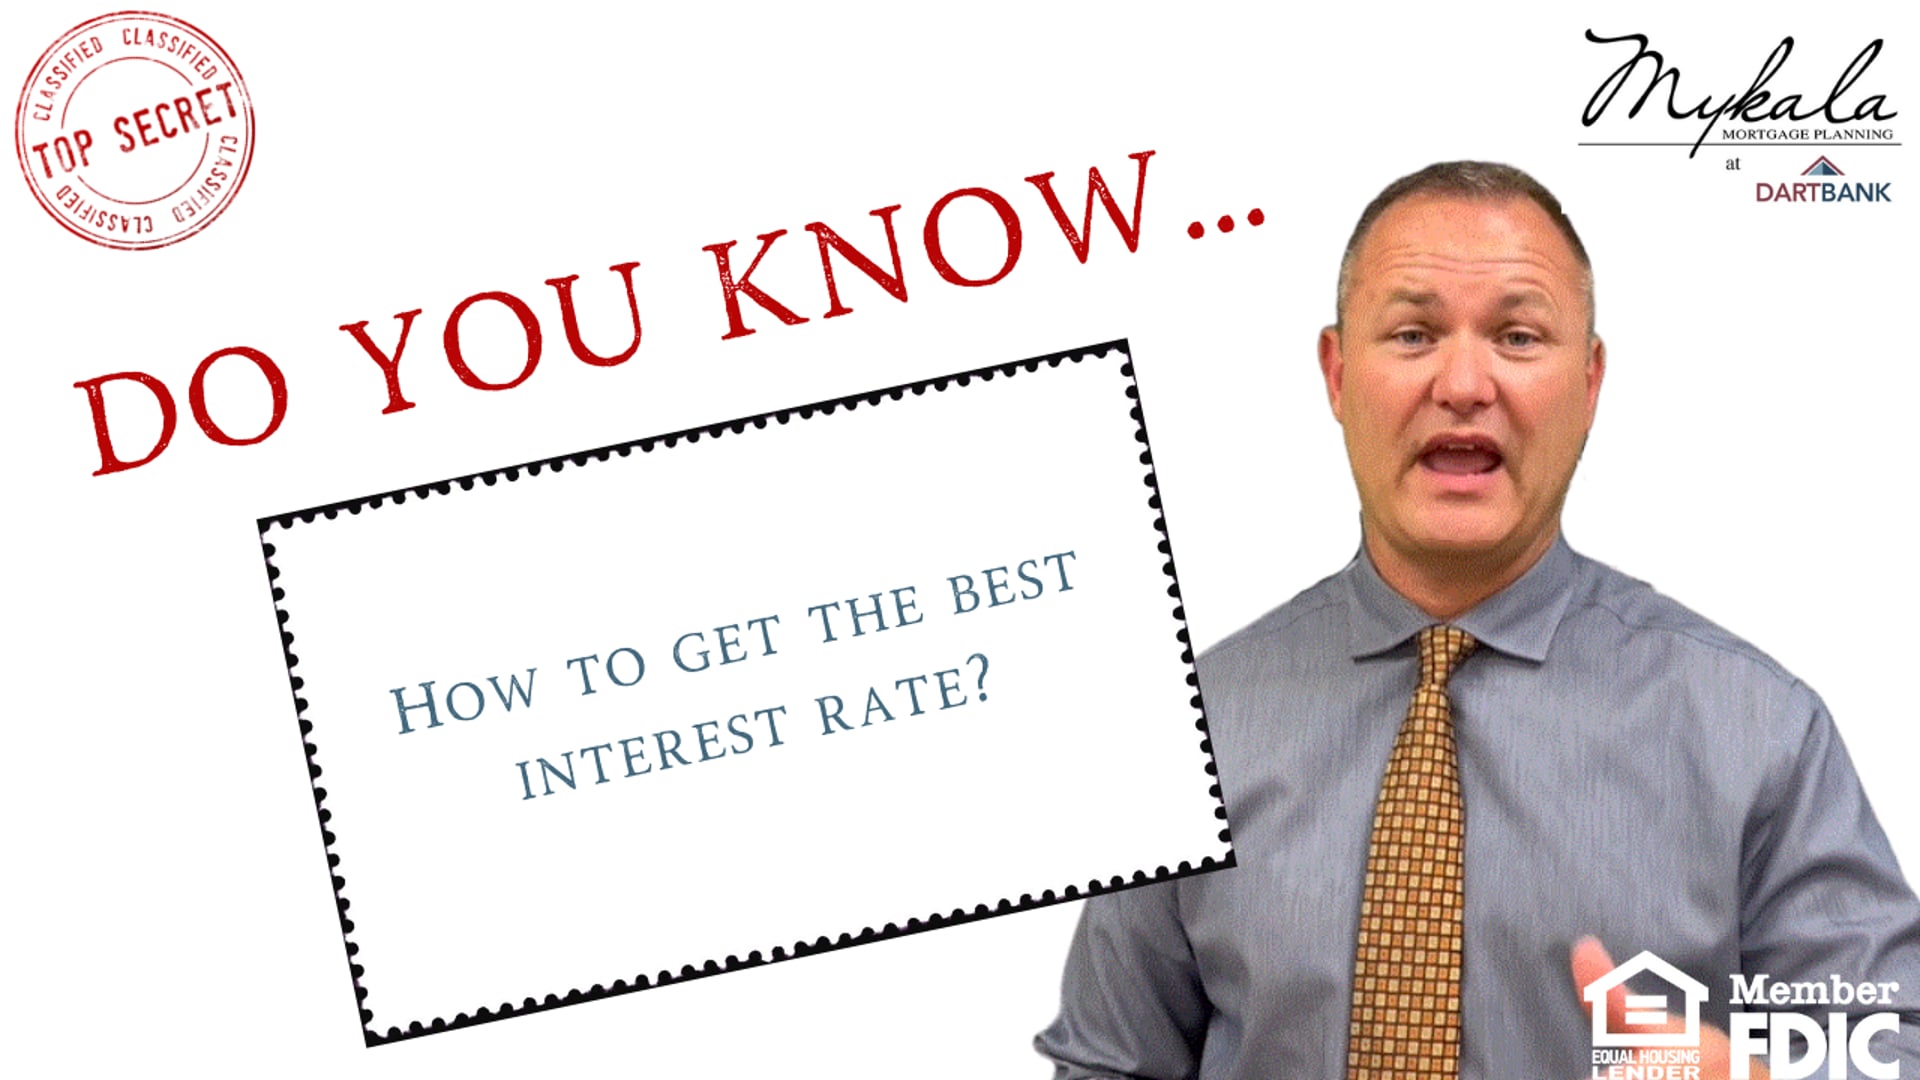 How To Get The Best Interest Rate